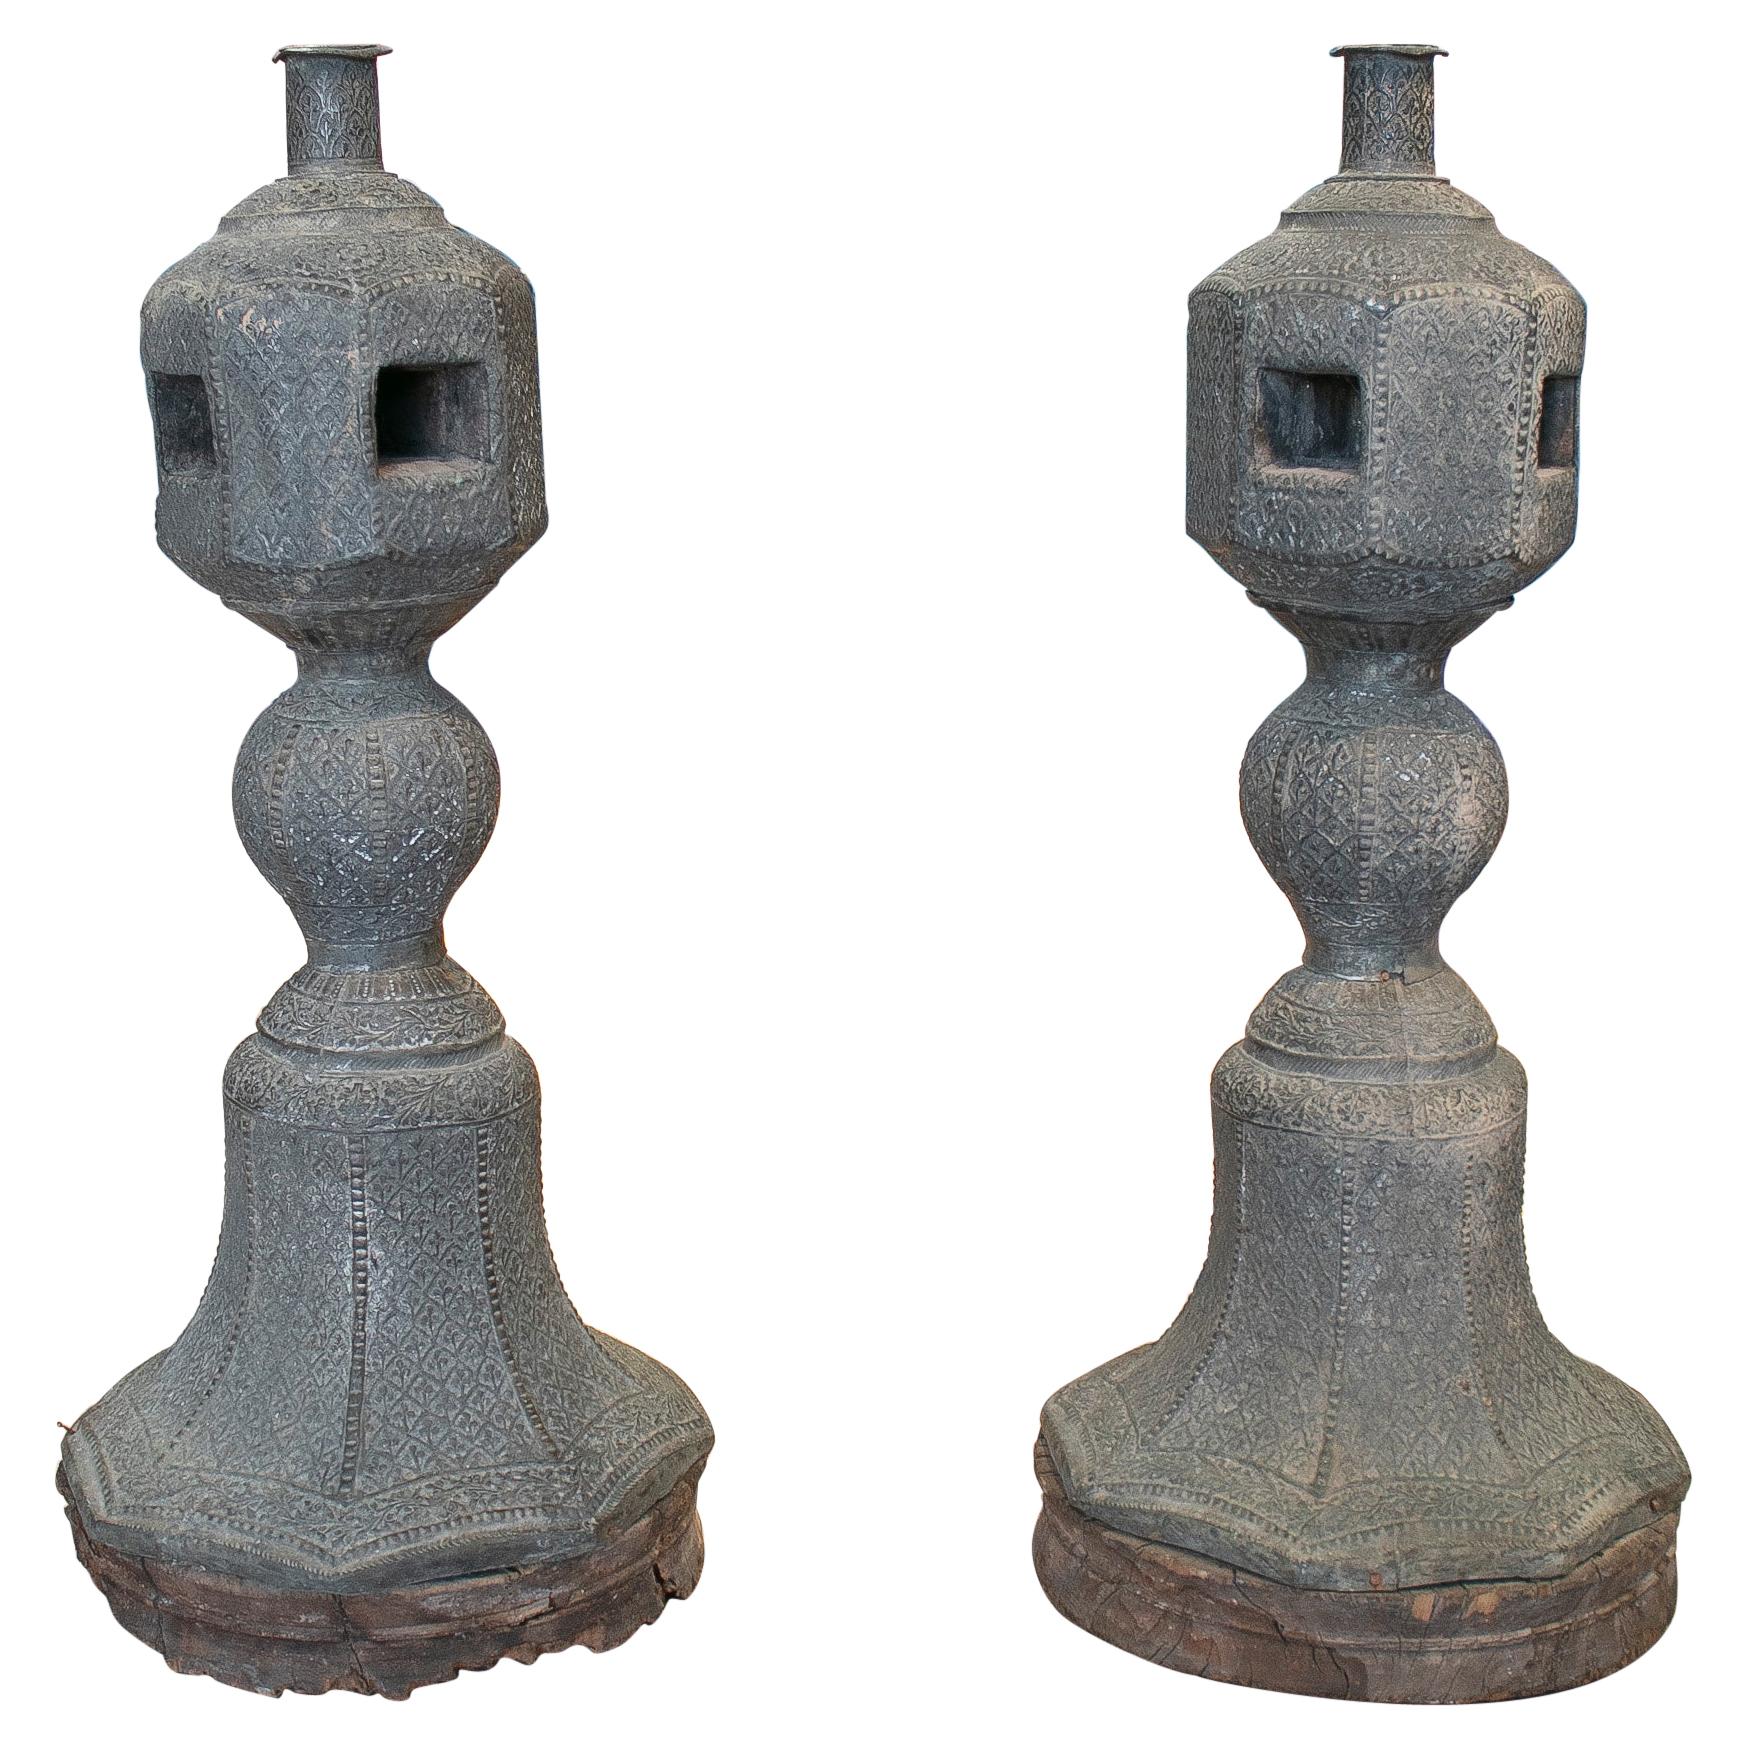 Pair of 1930s Indian Hand Hammered Metal & Wood Table Legs